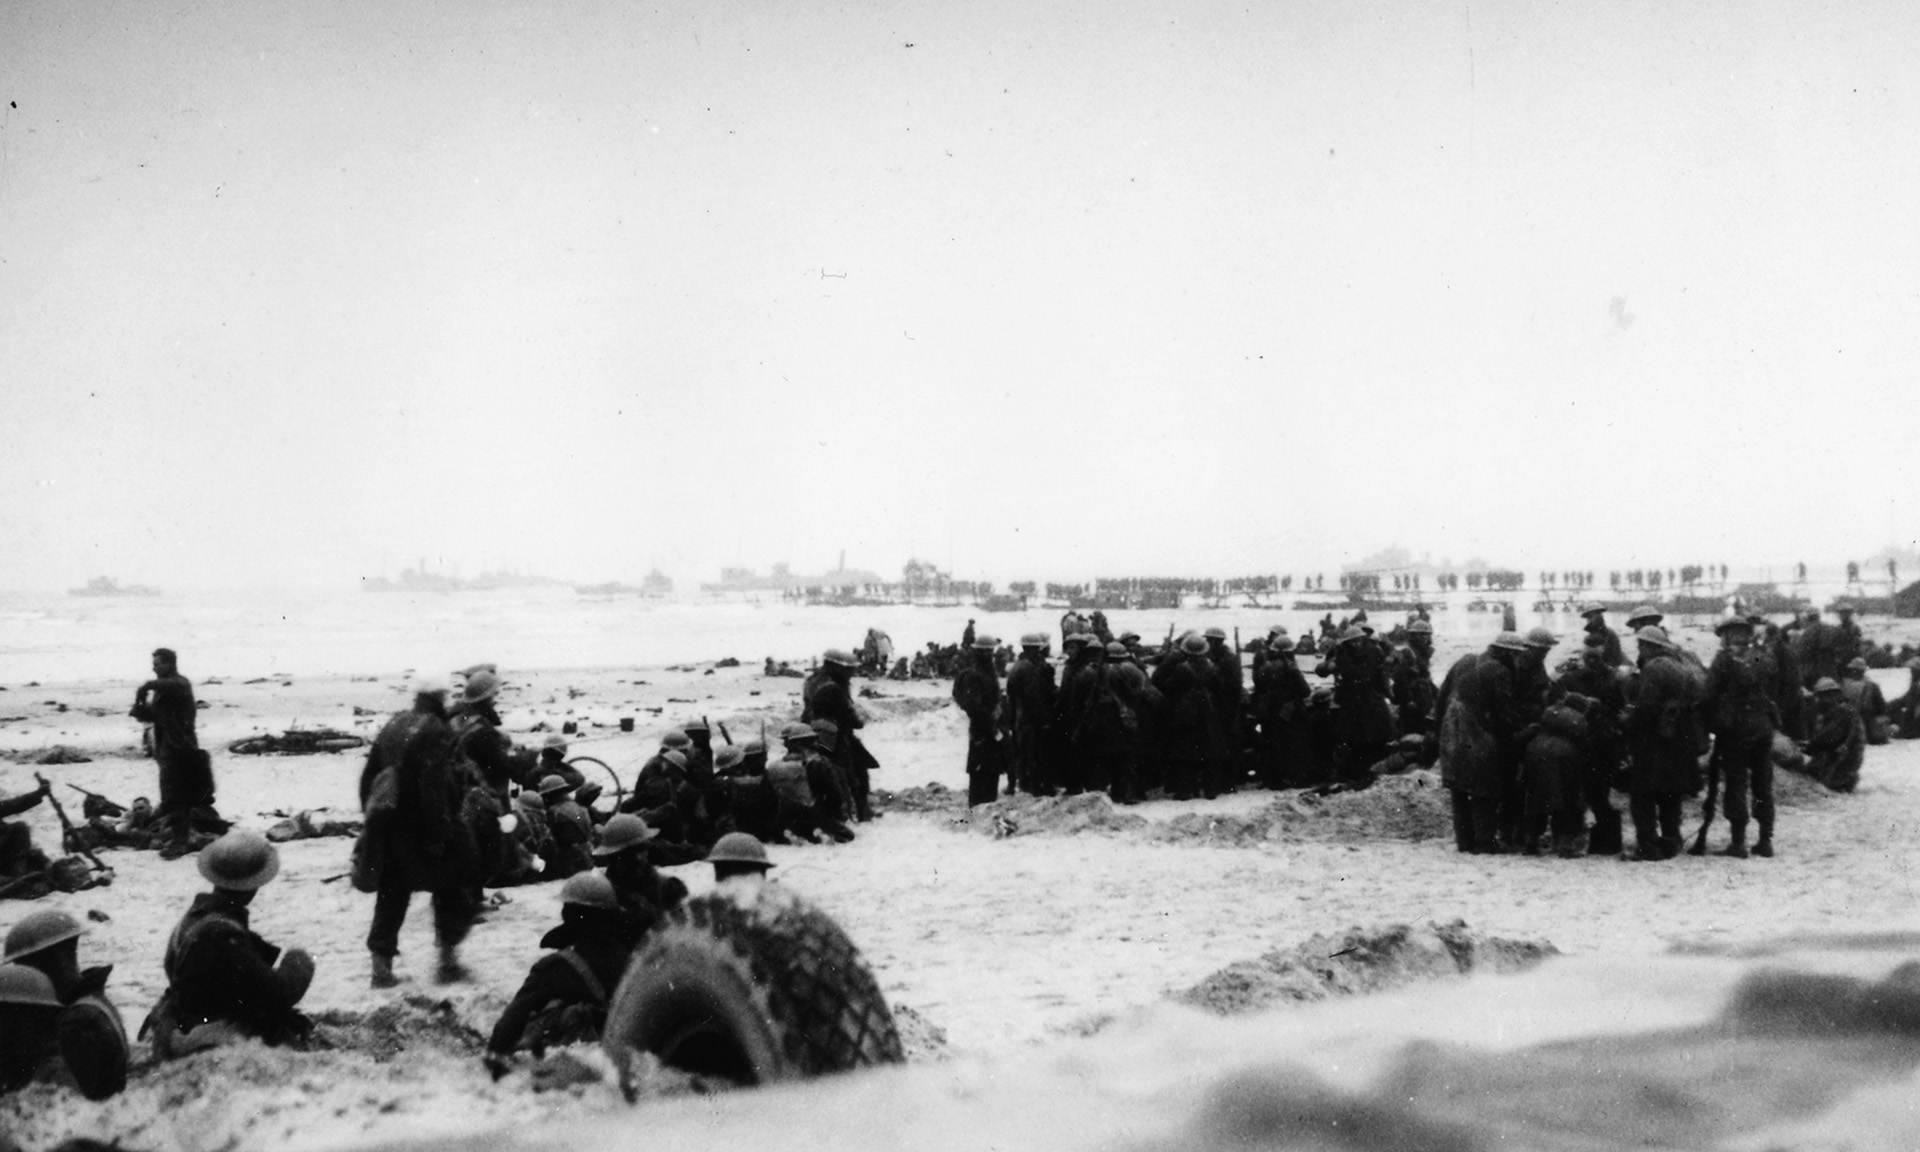 British troops stake out a beachhead and prepare to defend themselves against a possible German assault on the Norwegian shore in May 1940.